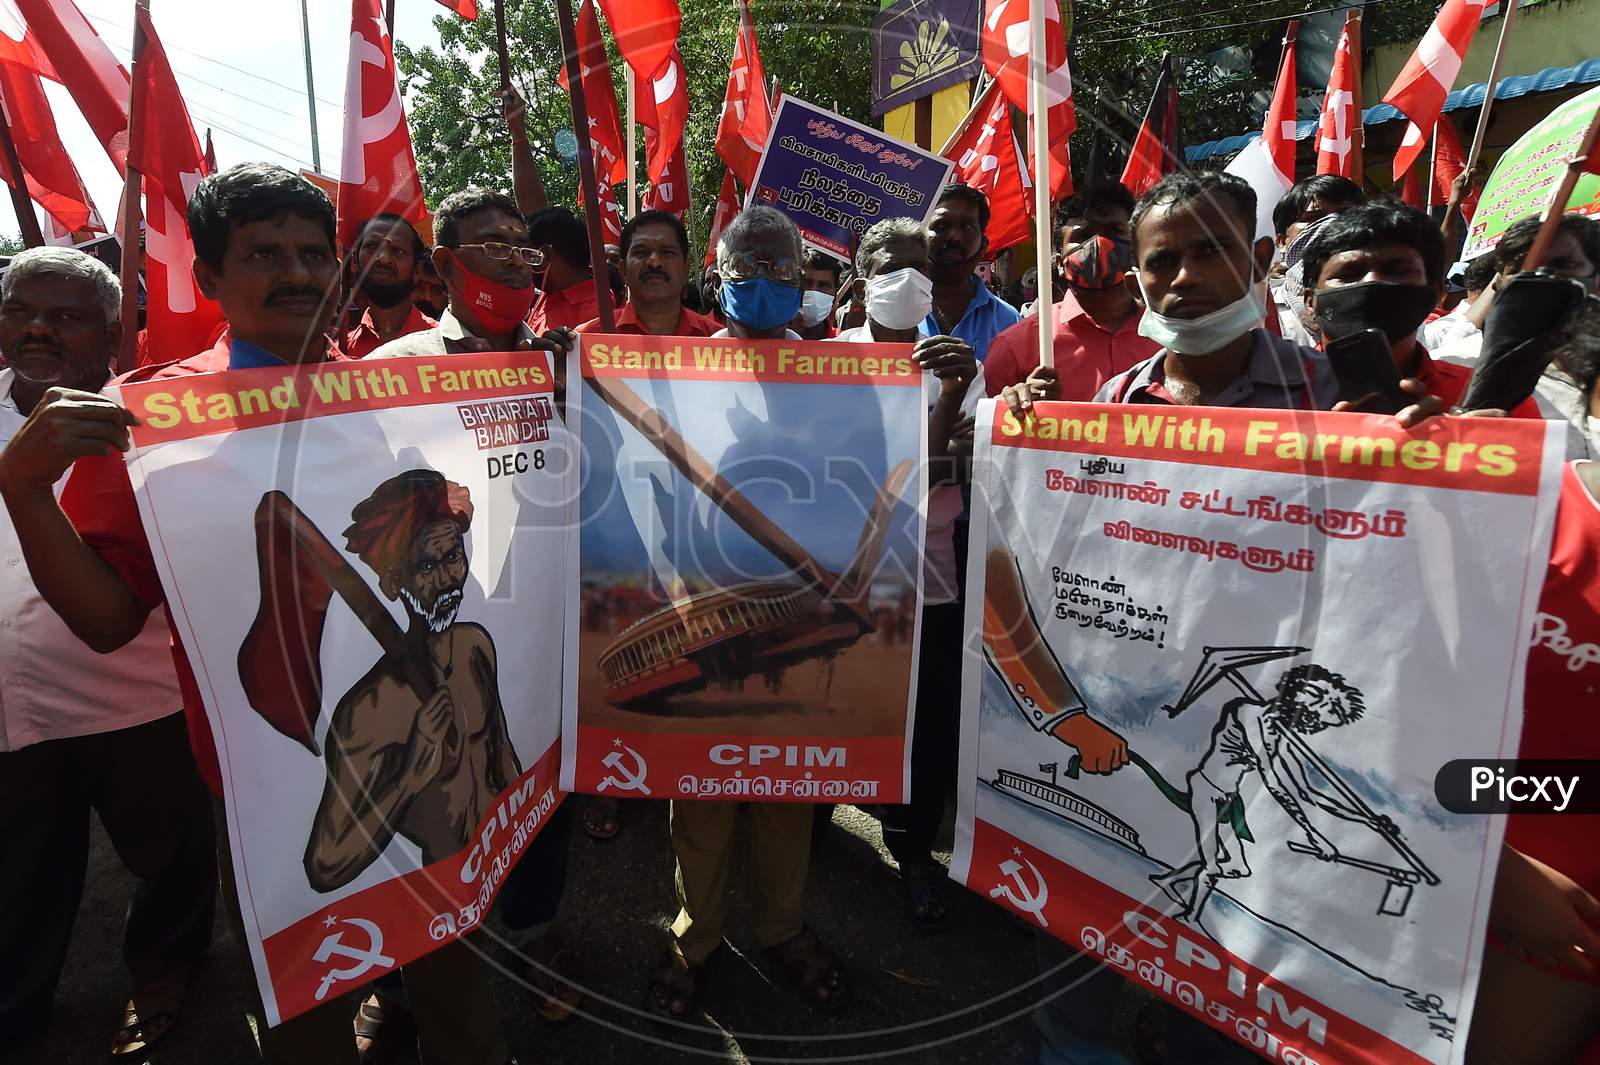 Communist Party Of India (Cpi) Activists And Supporters Shout Slogans During A Demonstration Supporting A Nationwide General Strike Called By Farmers To Protest Against The Recent Agricultural Reforms In Chennai On December 8, 2020.